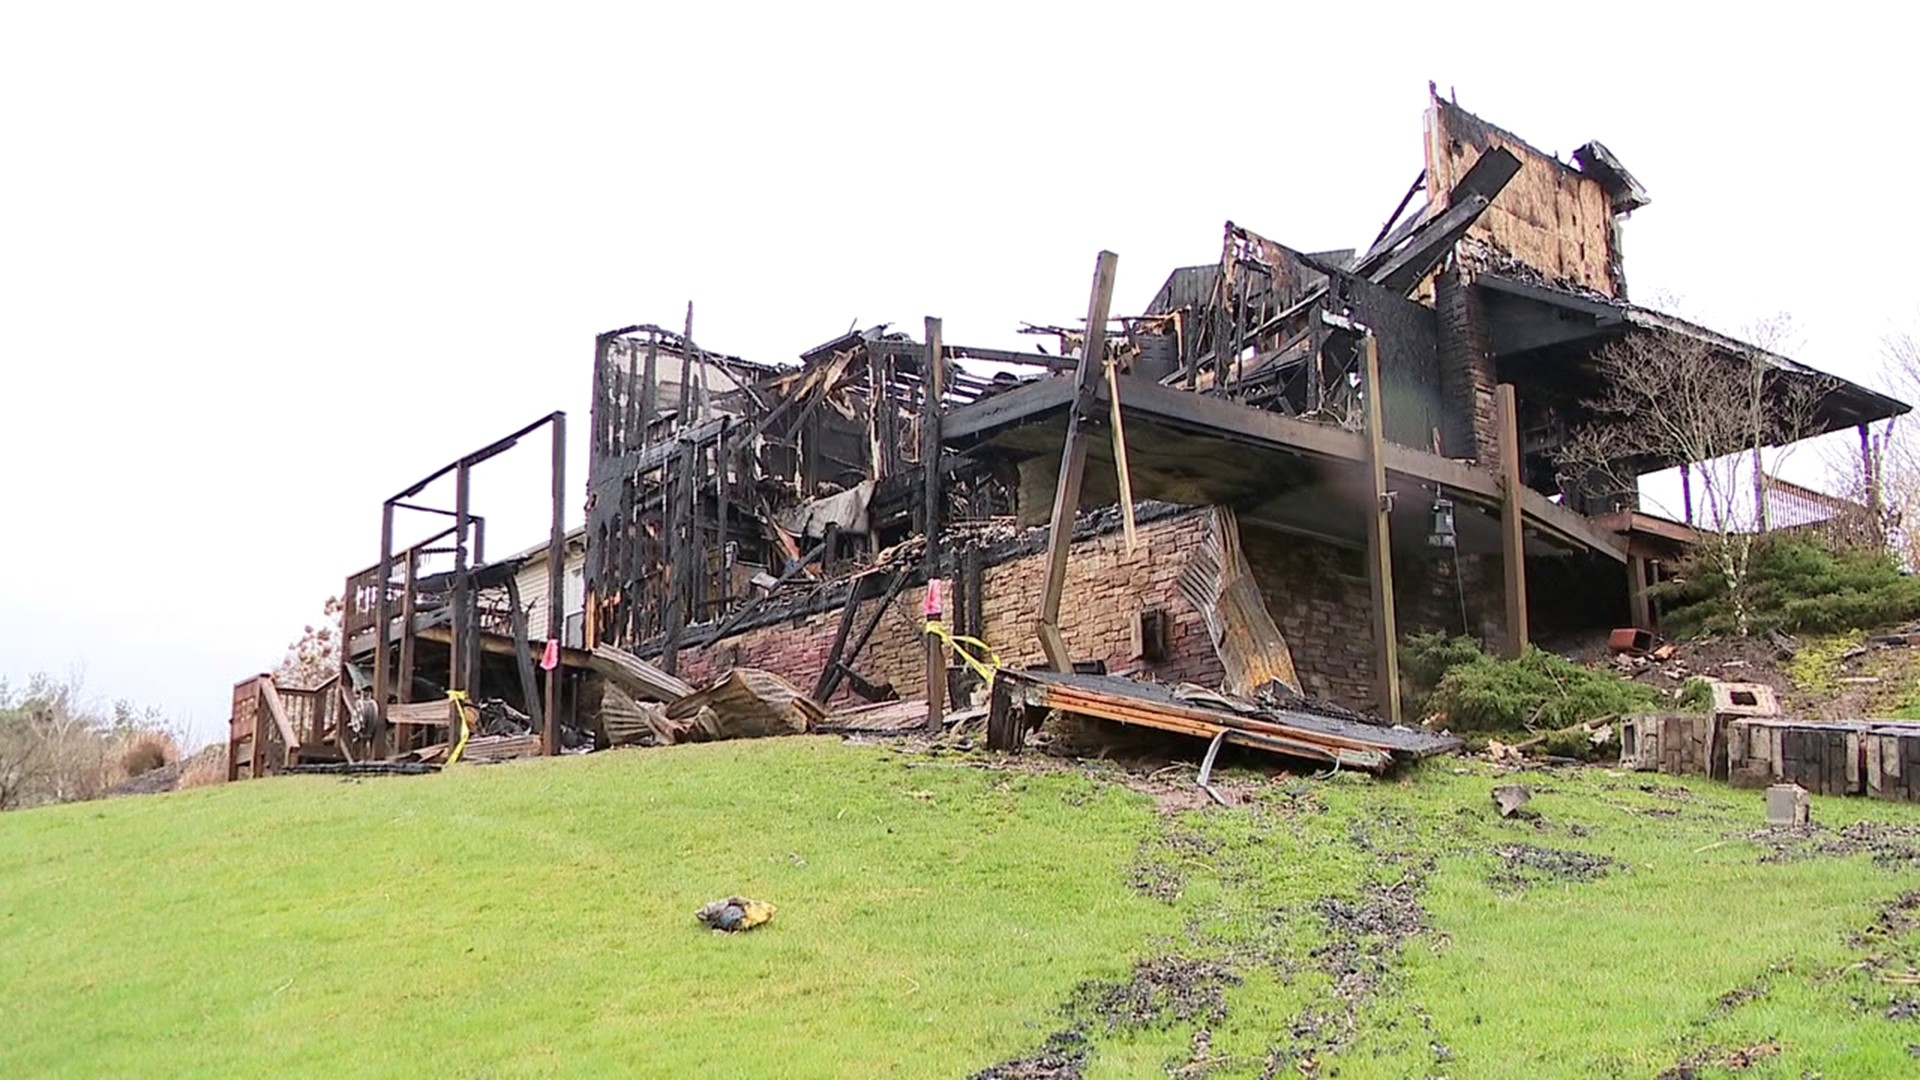 A family in Luzerne County lost everything after a fire ripped through their home over the weekend.